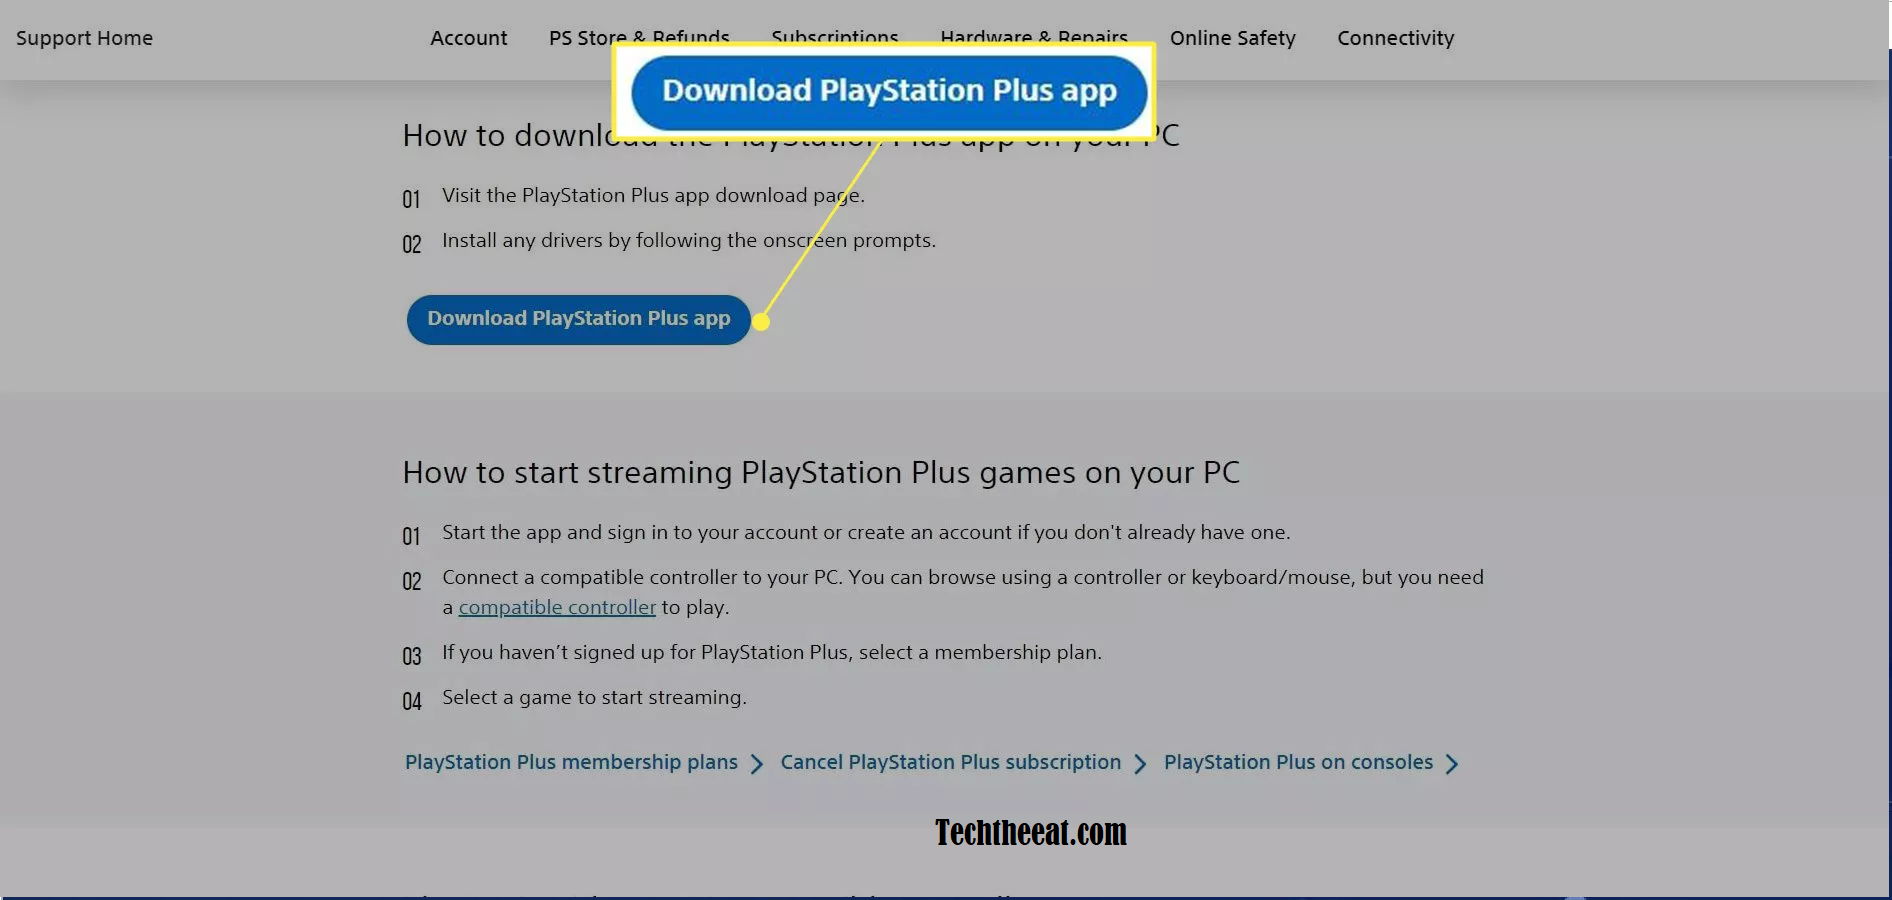 Playstations PS Plus PC site and click Download PlayStation Plus app.